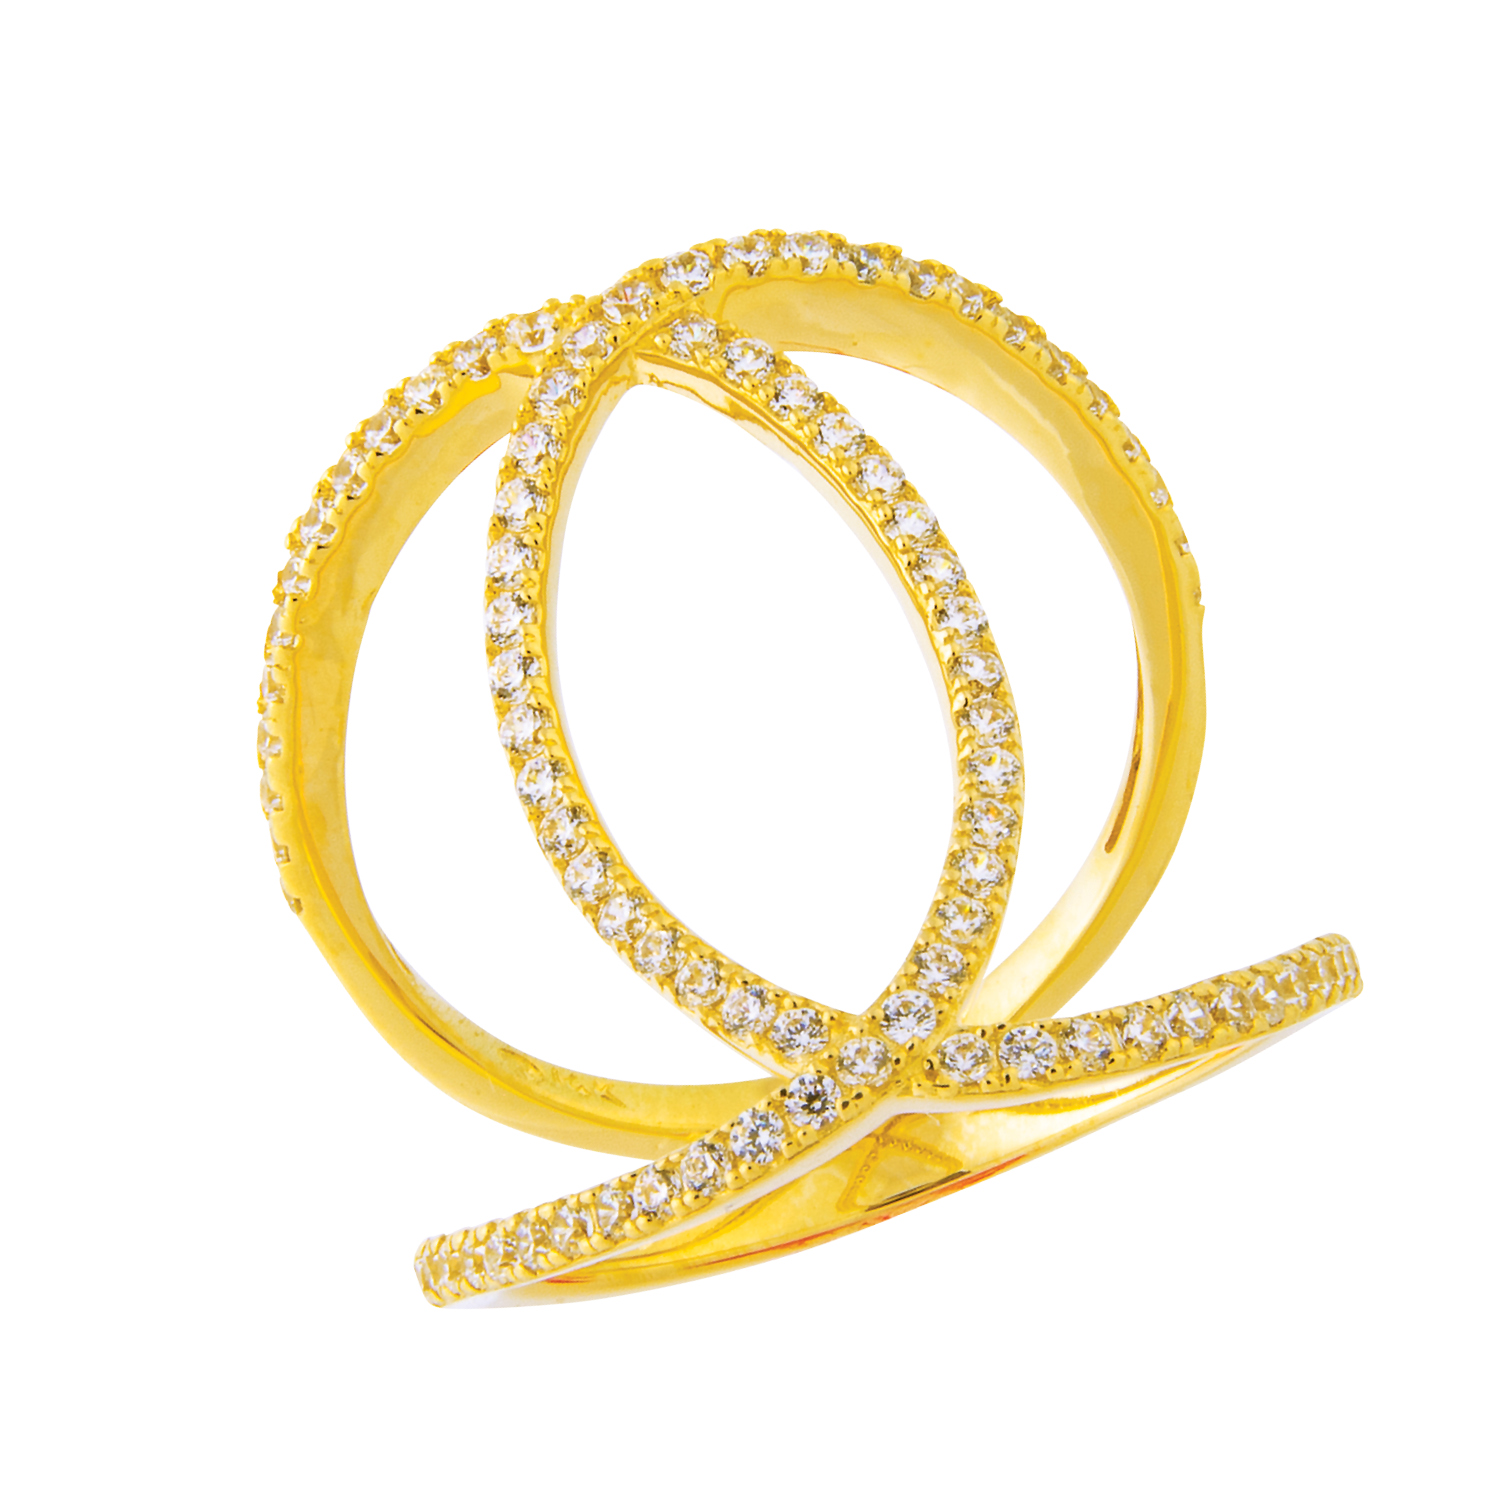 Alloy 90% Fancy ring for women, Light Weight, Size: Standard at Rs 25 in  Greater Noida